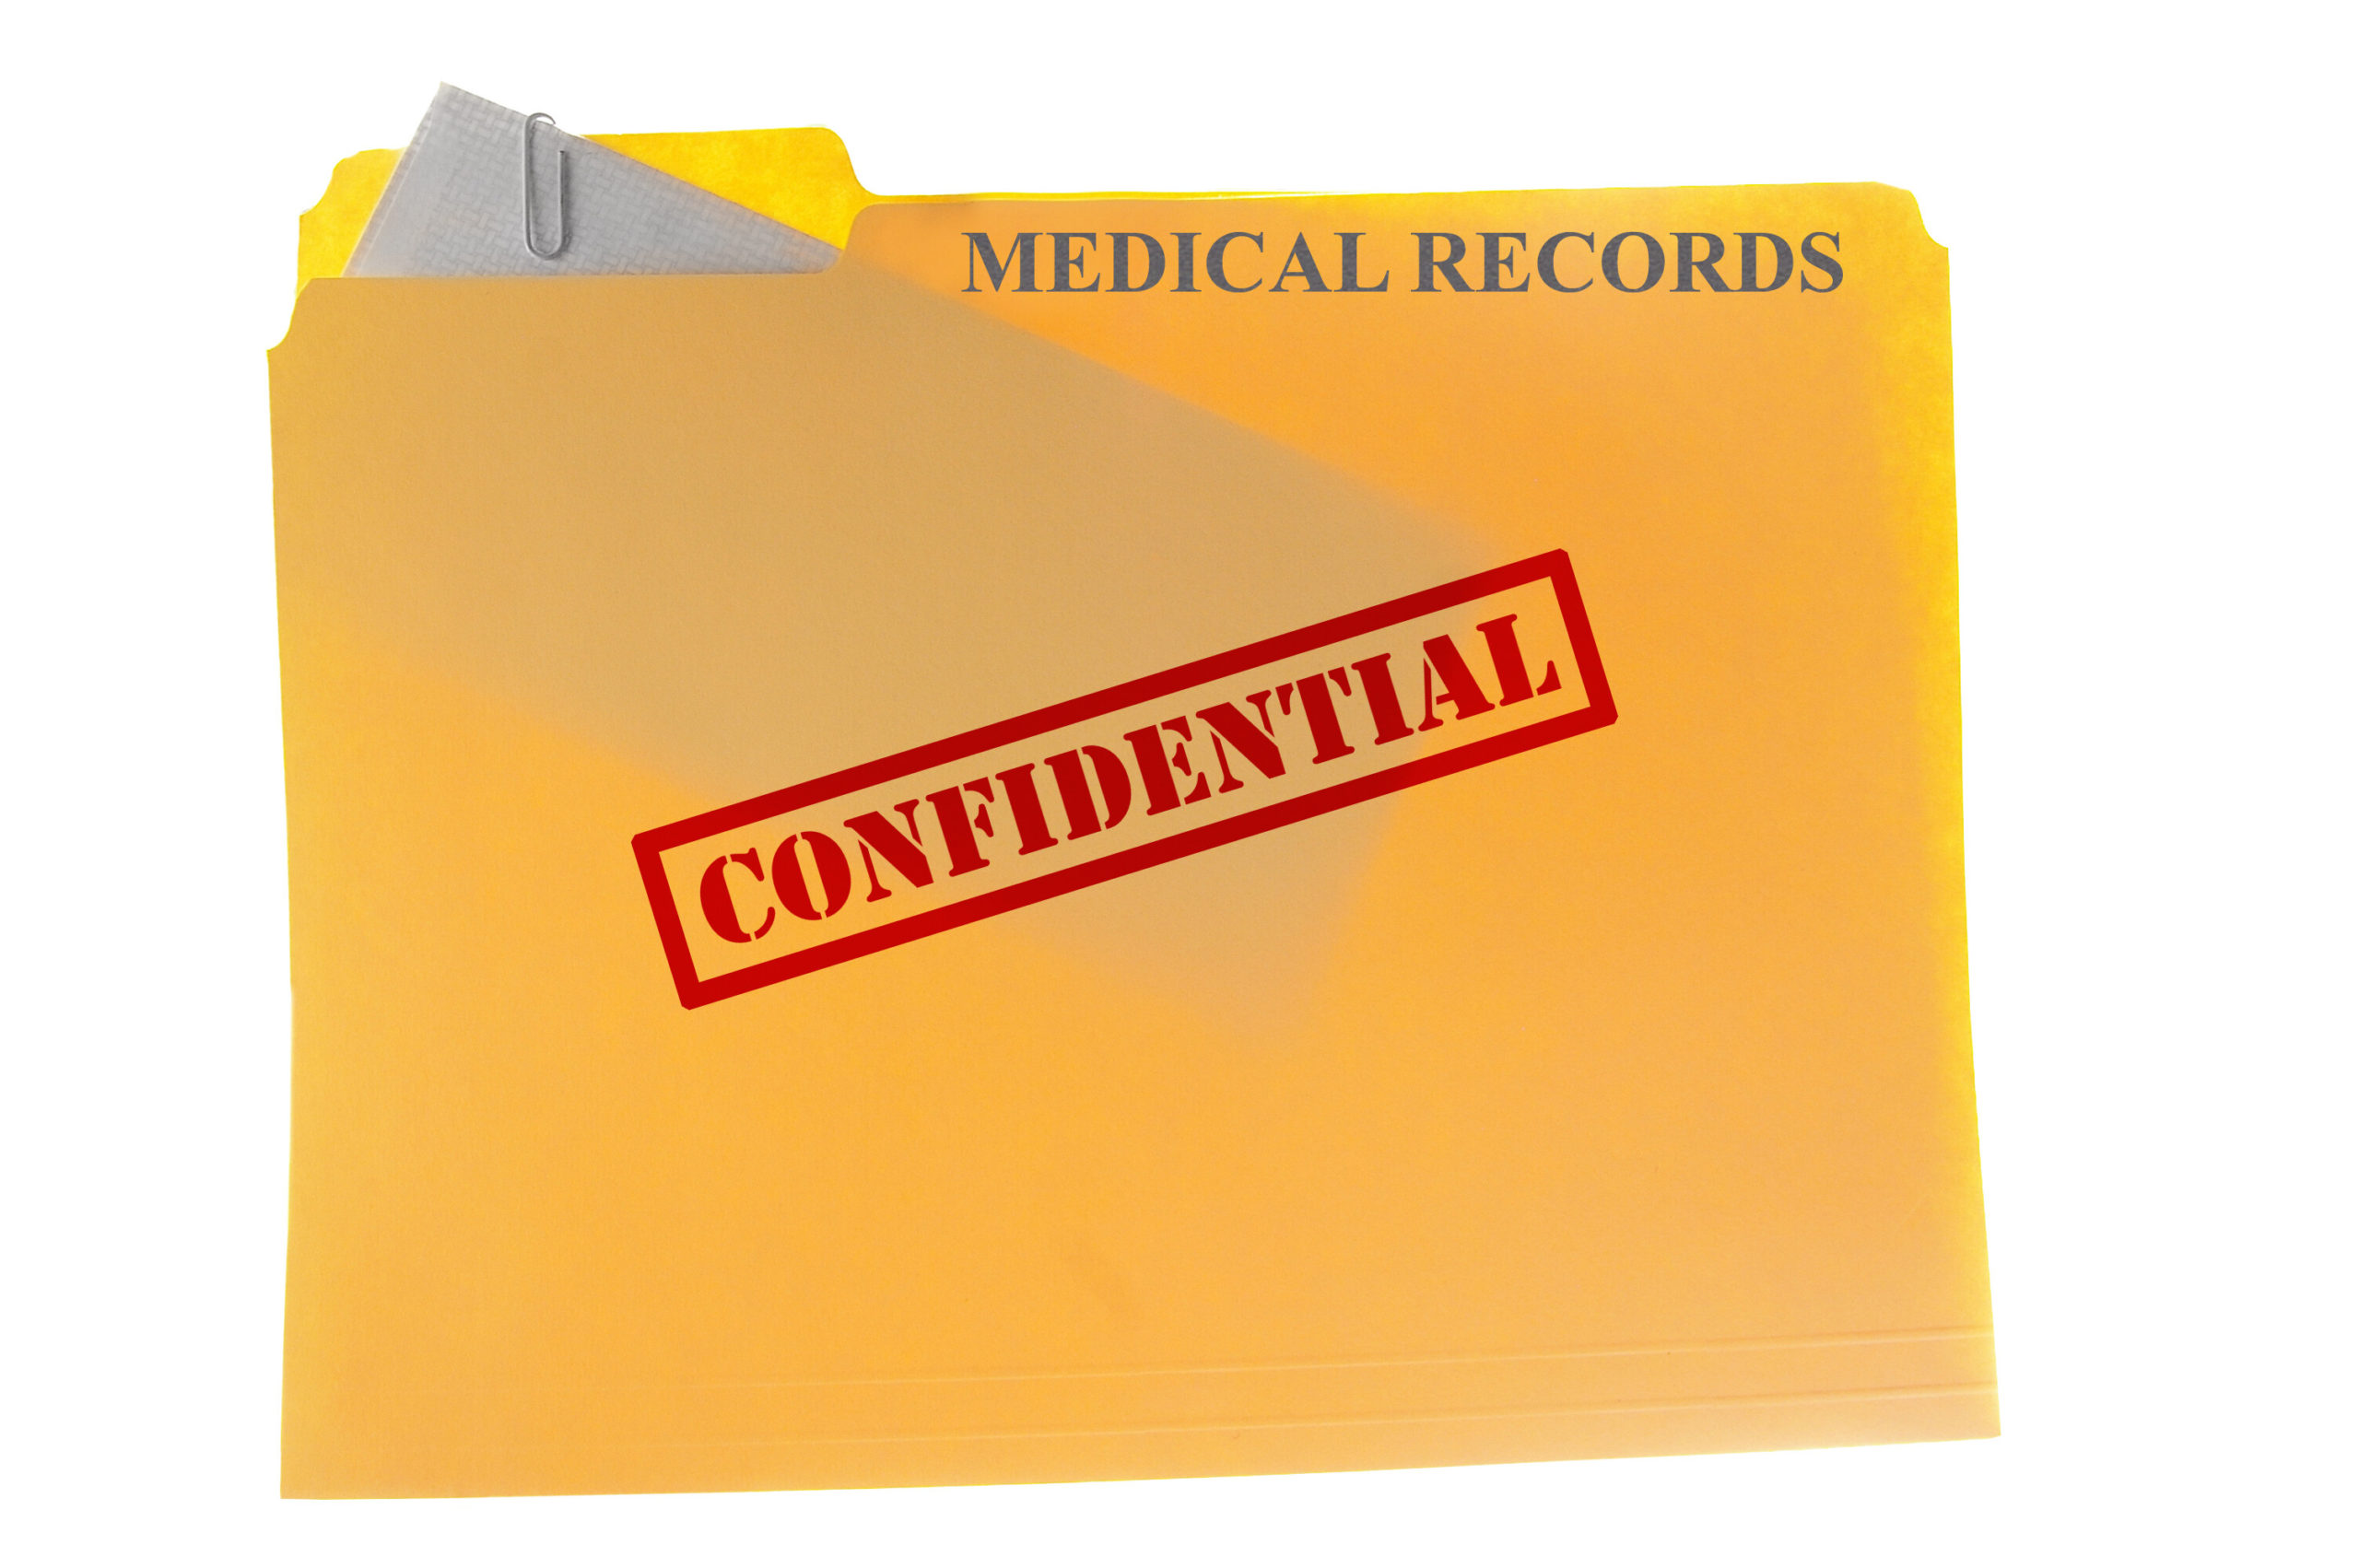 osfho confirms patient information may have been accessed by unauthorized third party scaled